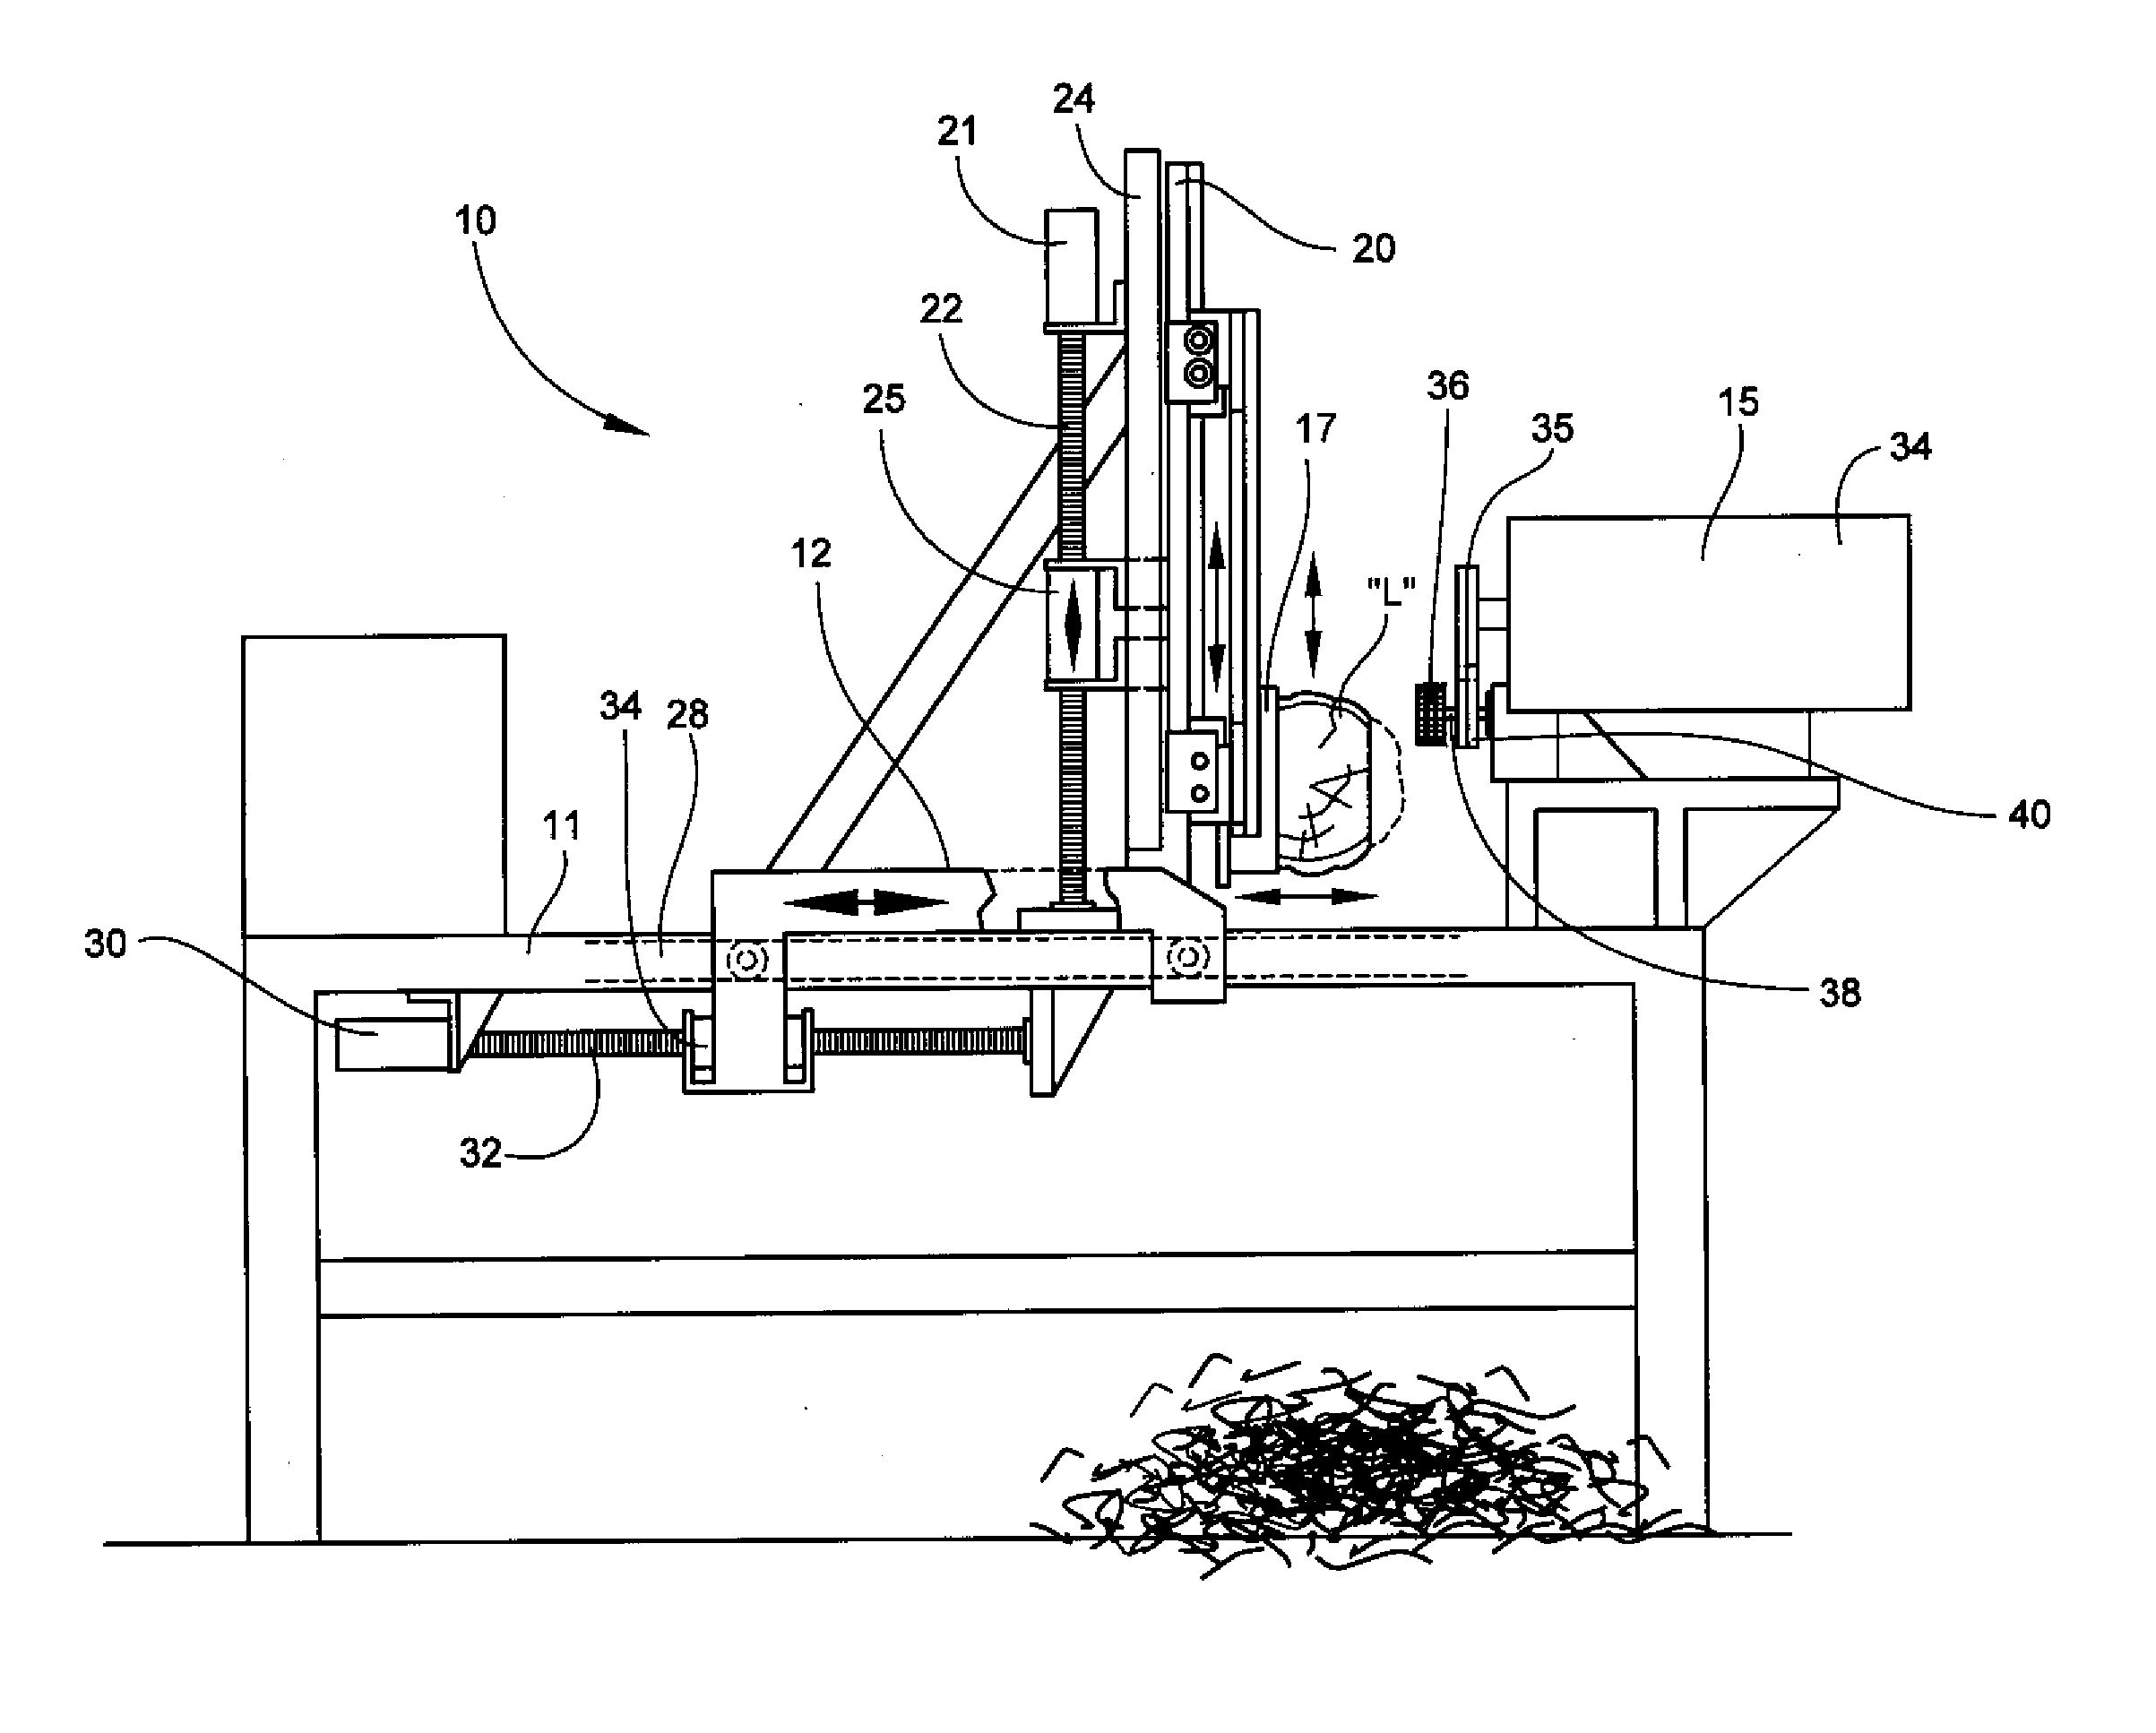 Method and apparatus for producing mulch